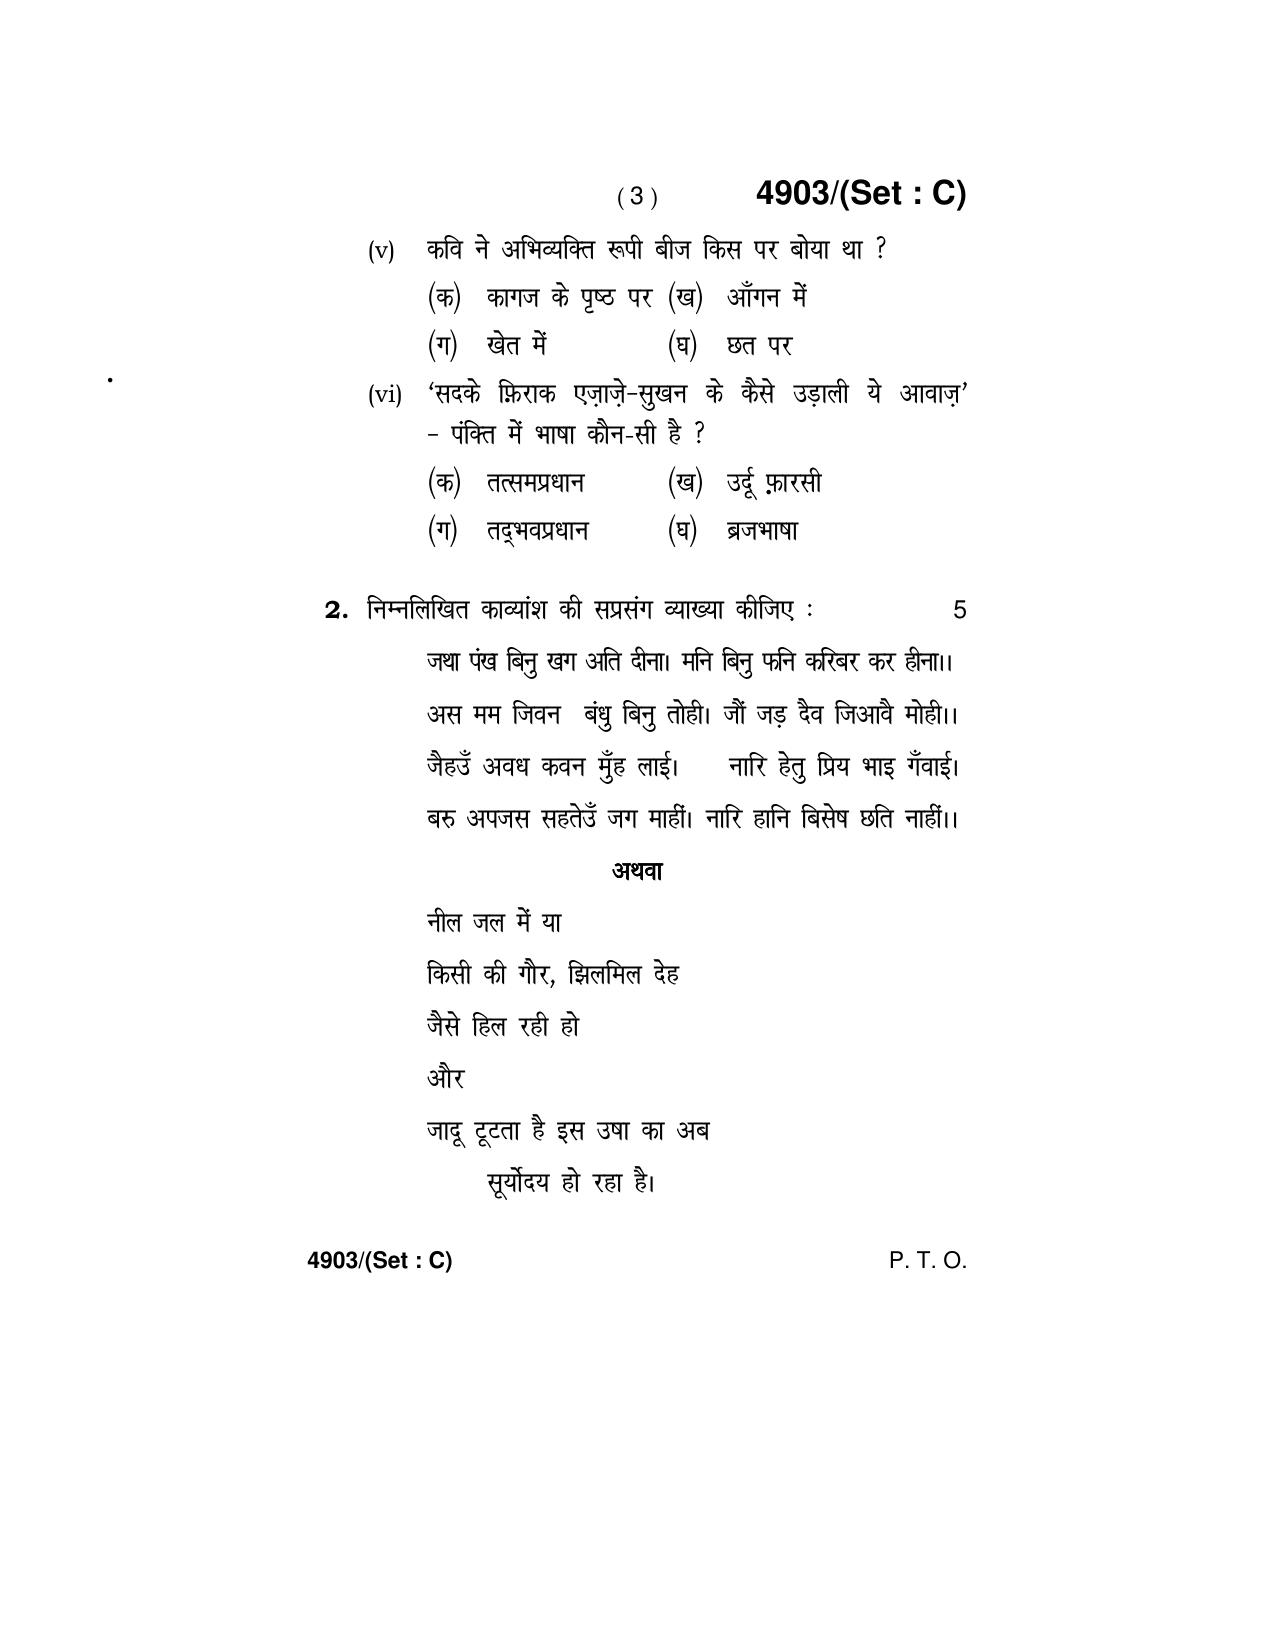 Haryana Board HBSE Class 12 Hindi Core 2020 Question Paper - Page 19